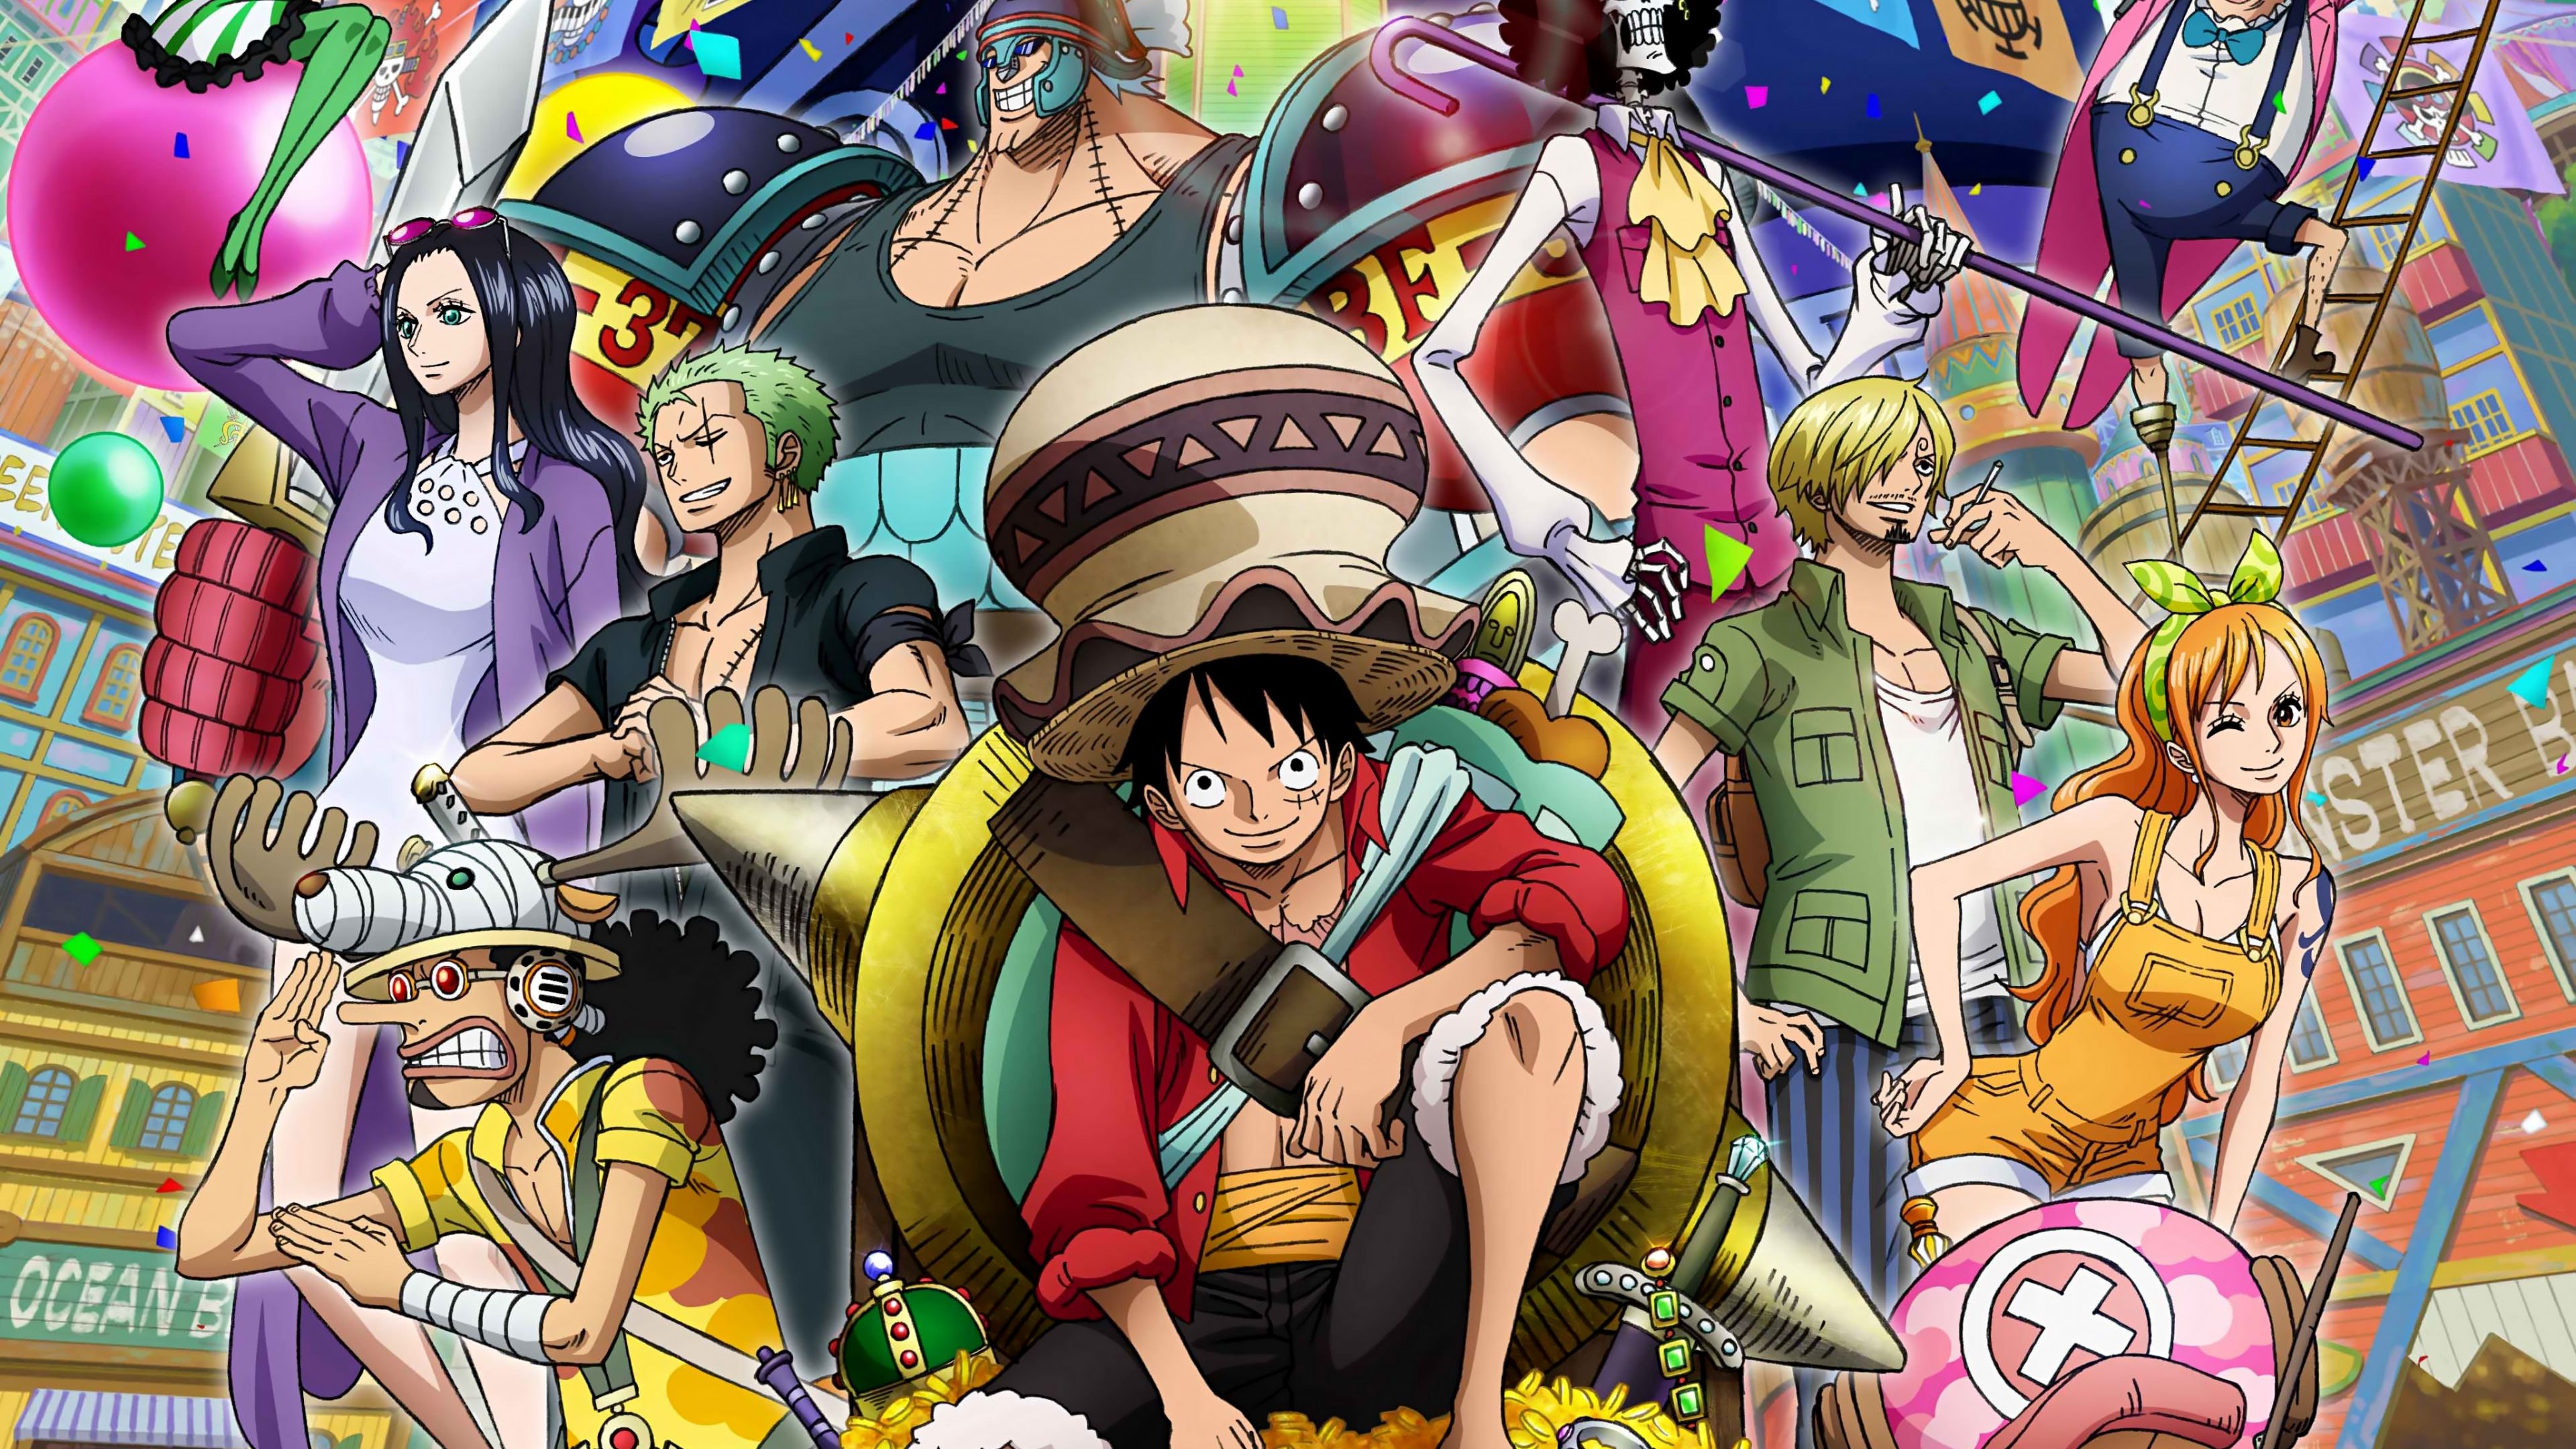 Anime One Piece 4k Wallpapers - Wallpaper Cave